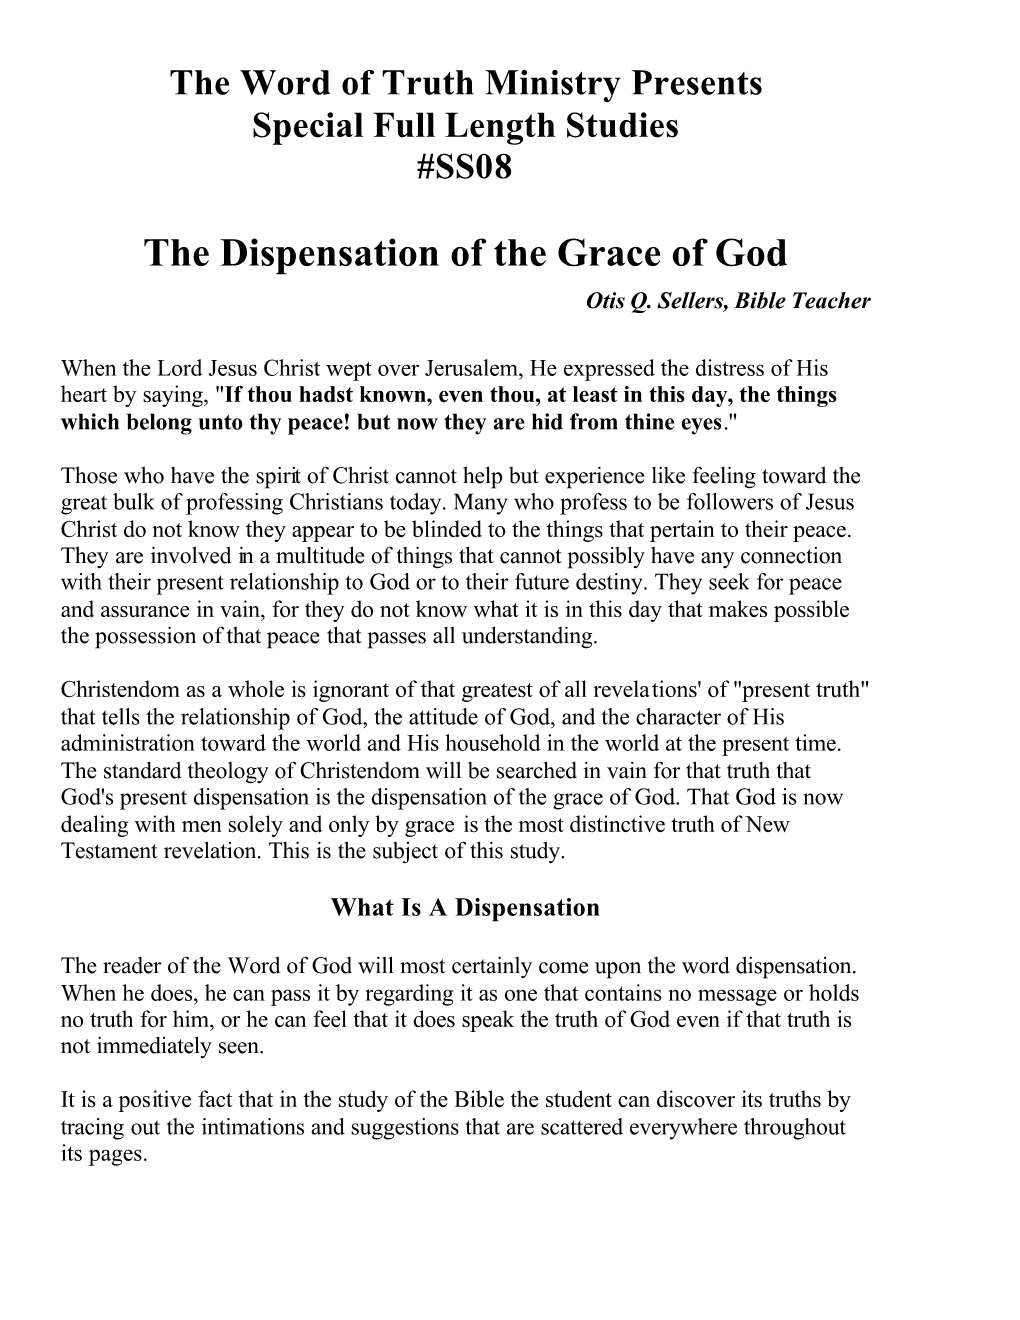 SS08 the Dispensation of the Grace Of